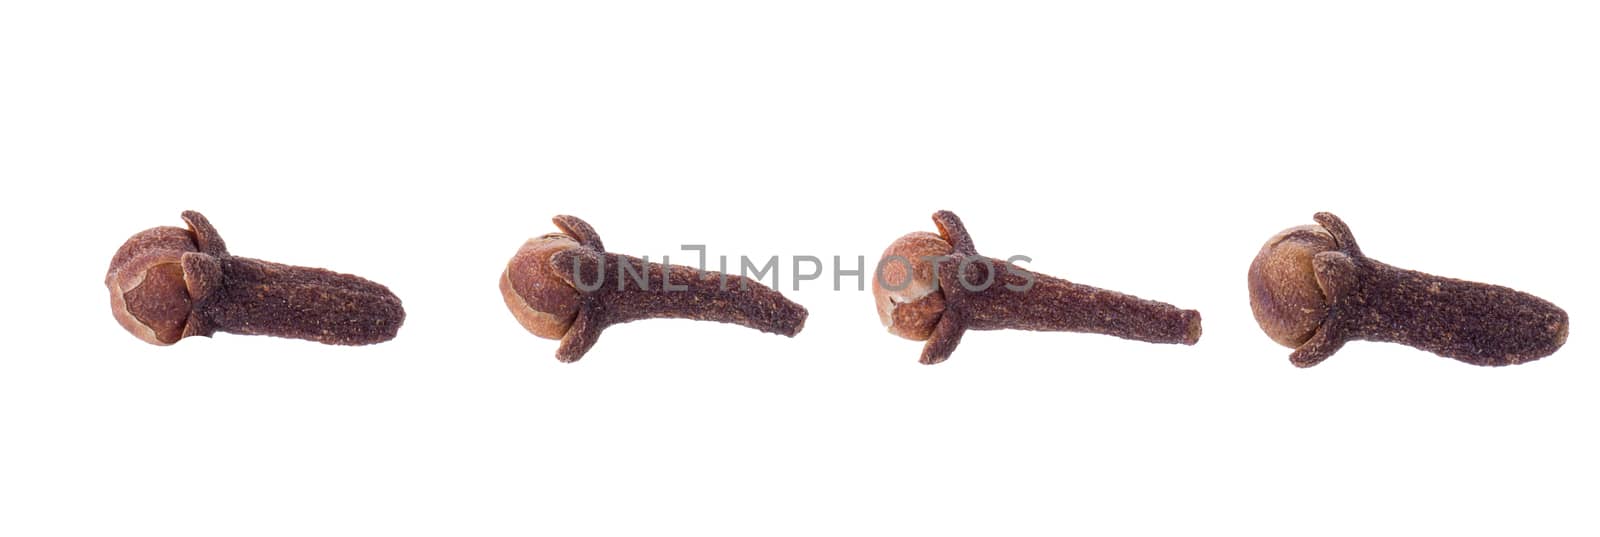 Clove spice closeup isolated on a white background.